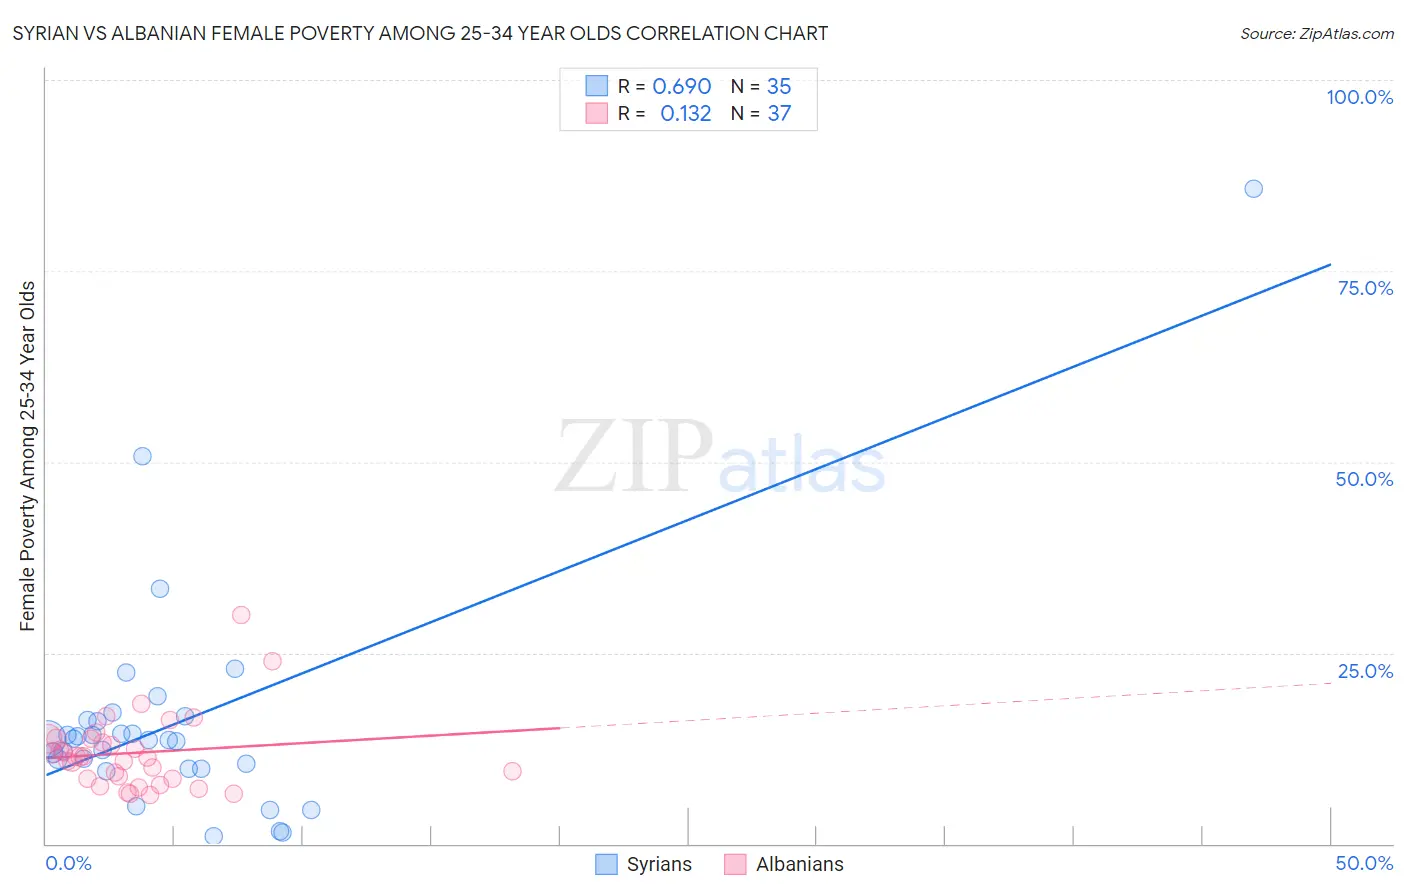 Syrian vs Albanian Female Poverty Among 25-34 Year Olds